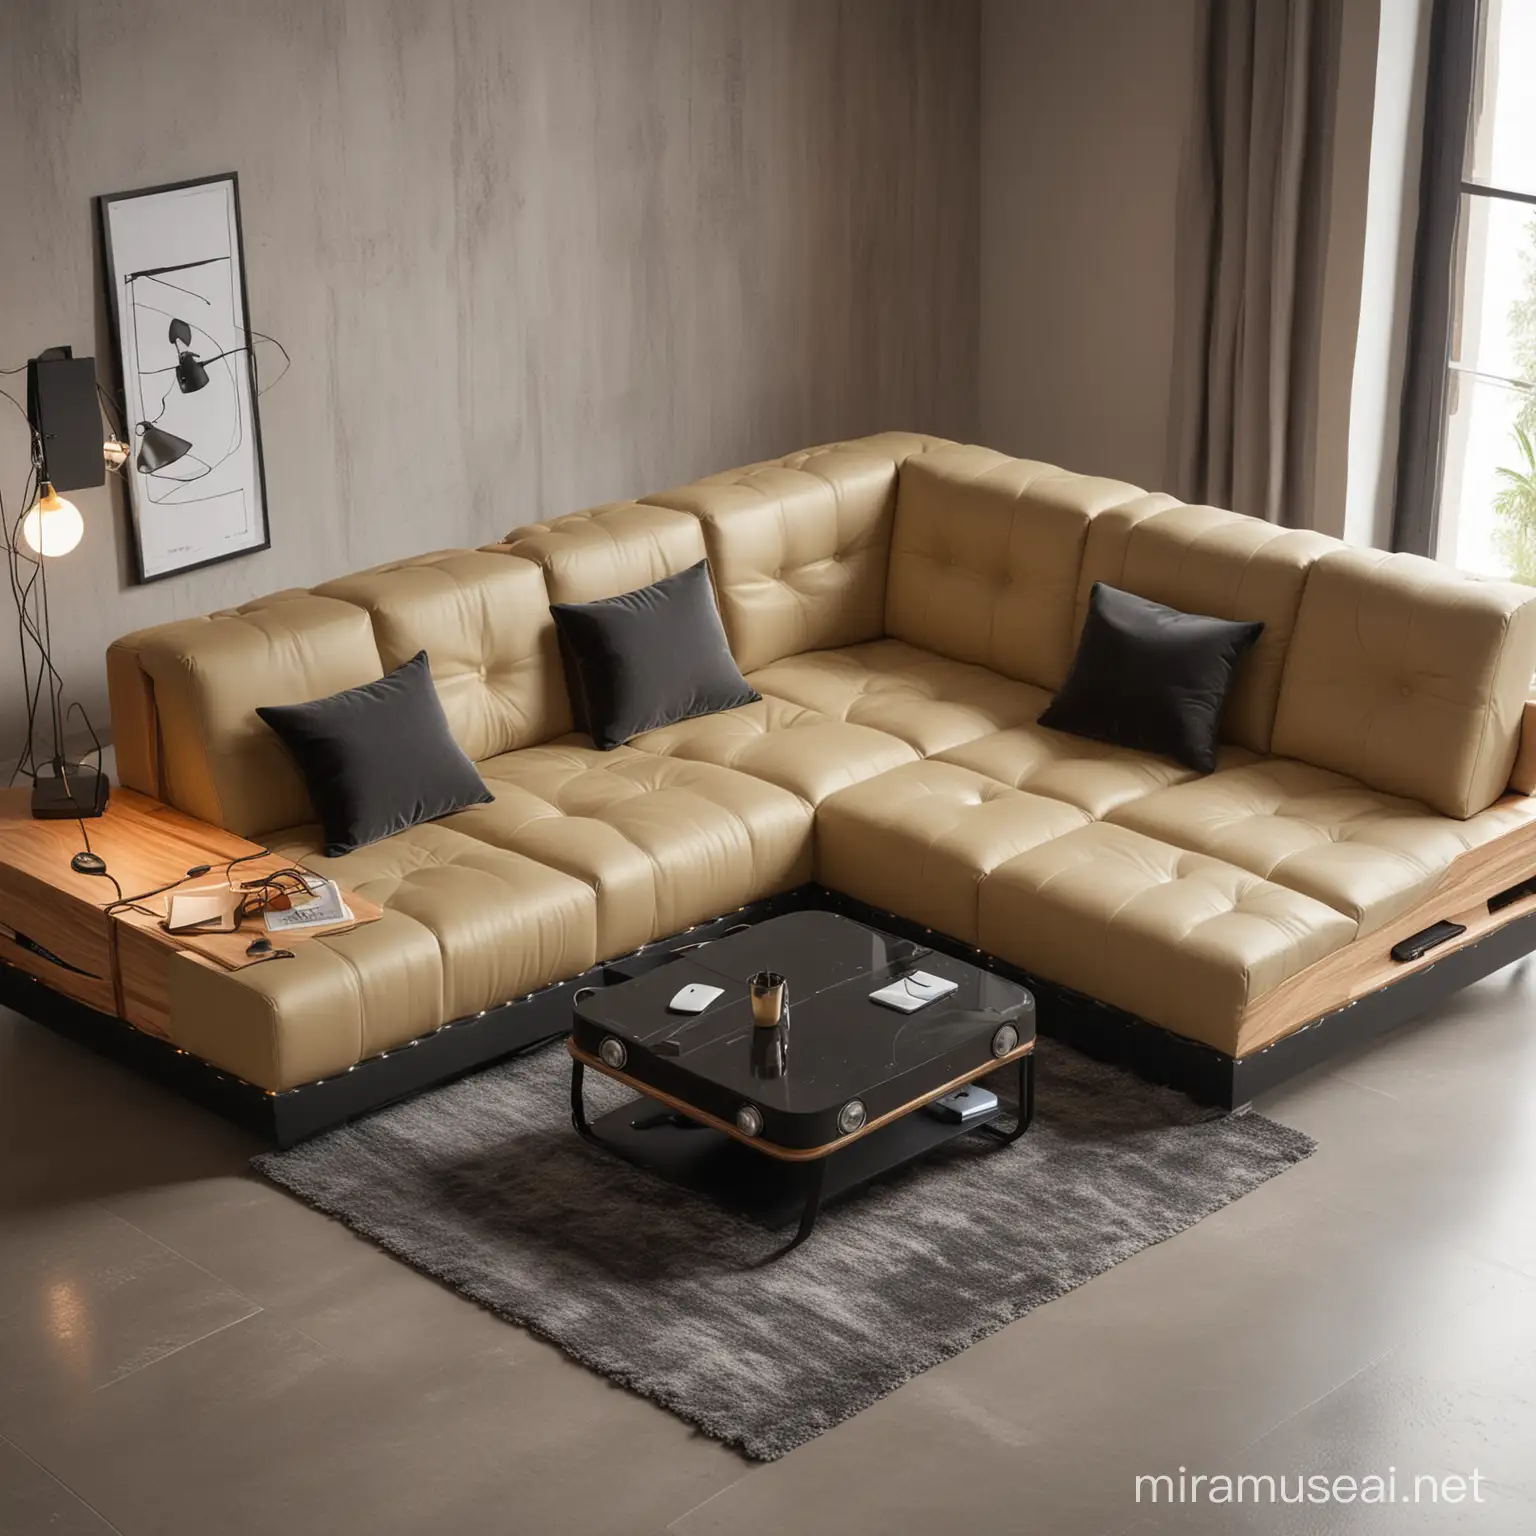 Futuristic Modular Sofa Set with Integrated Tech Features in a Luxury Villa